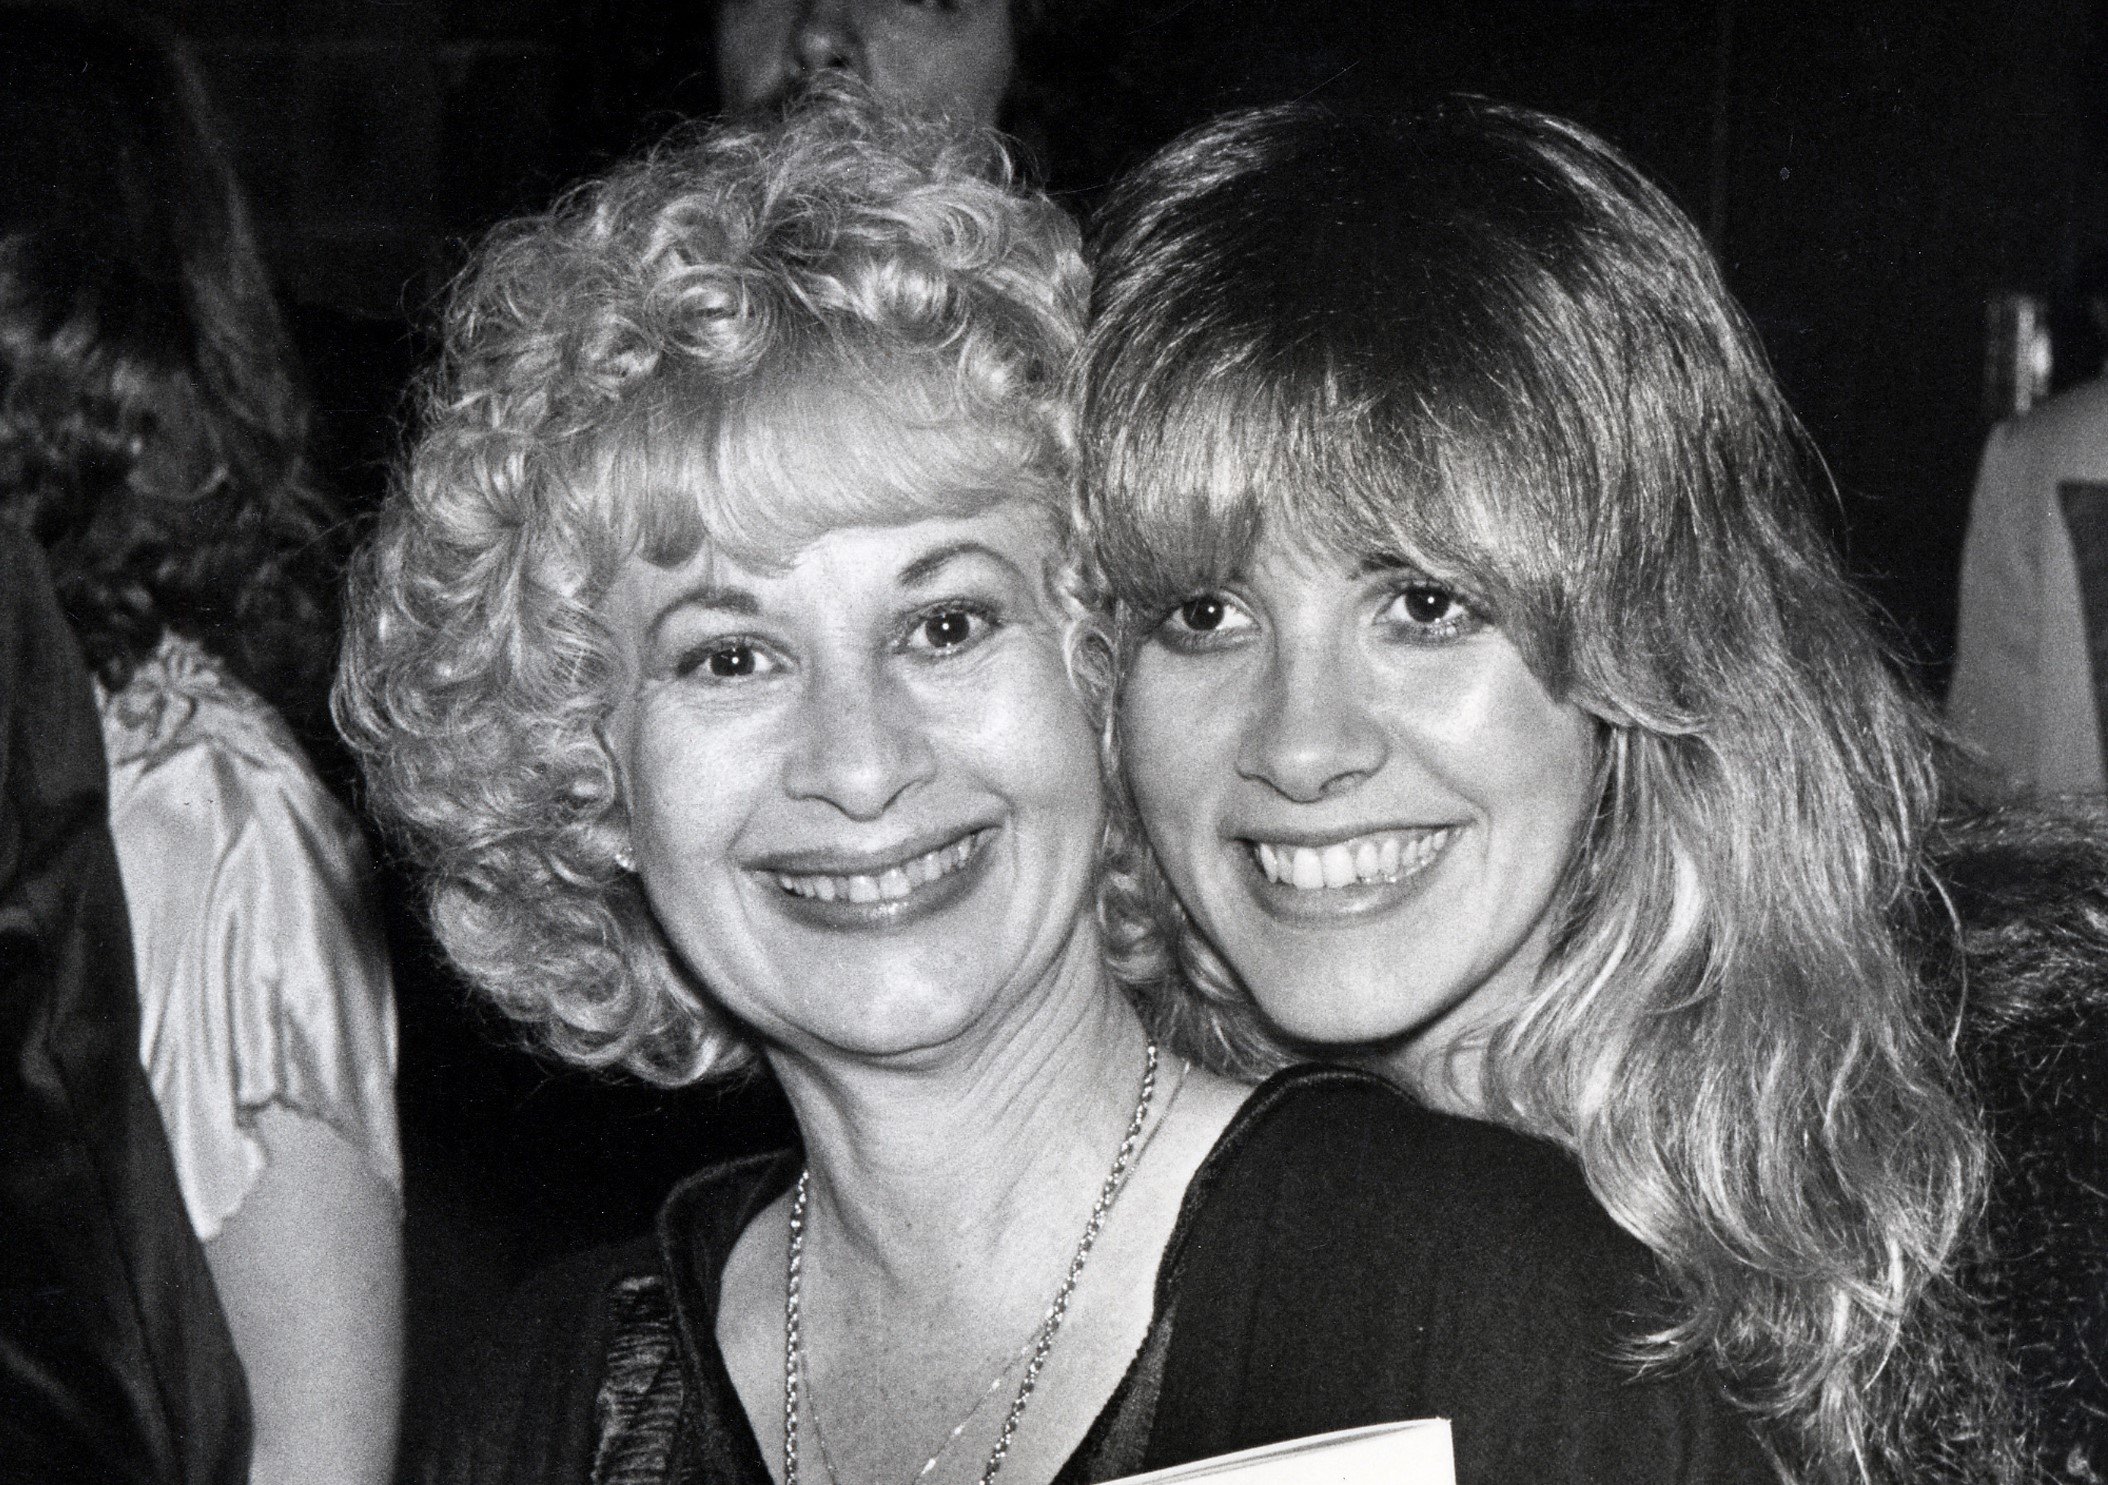 A black and white photo of Stevie Nicks posing cheek to cheek with her mother Barbara Nicks.